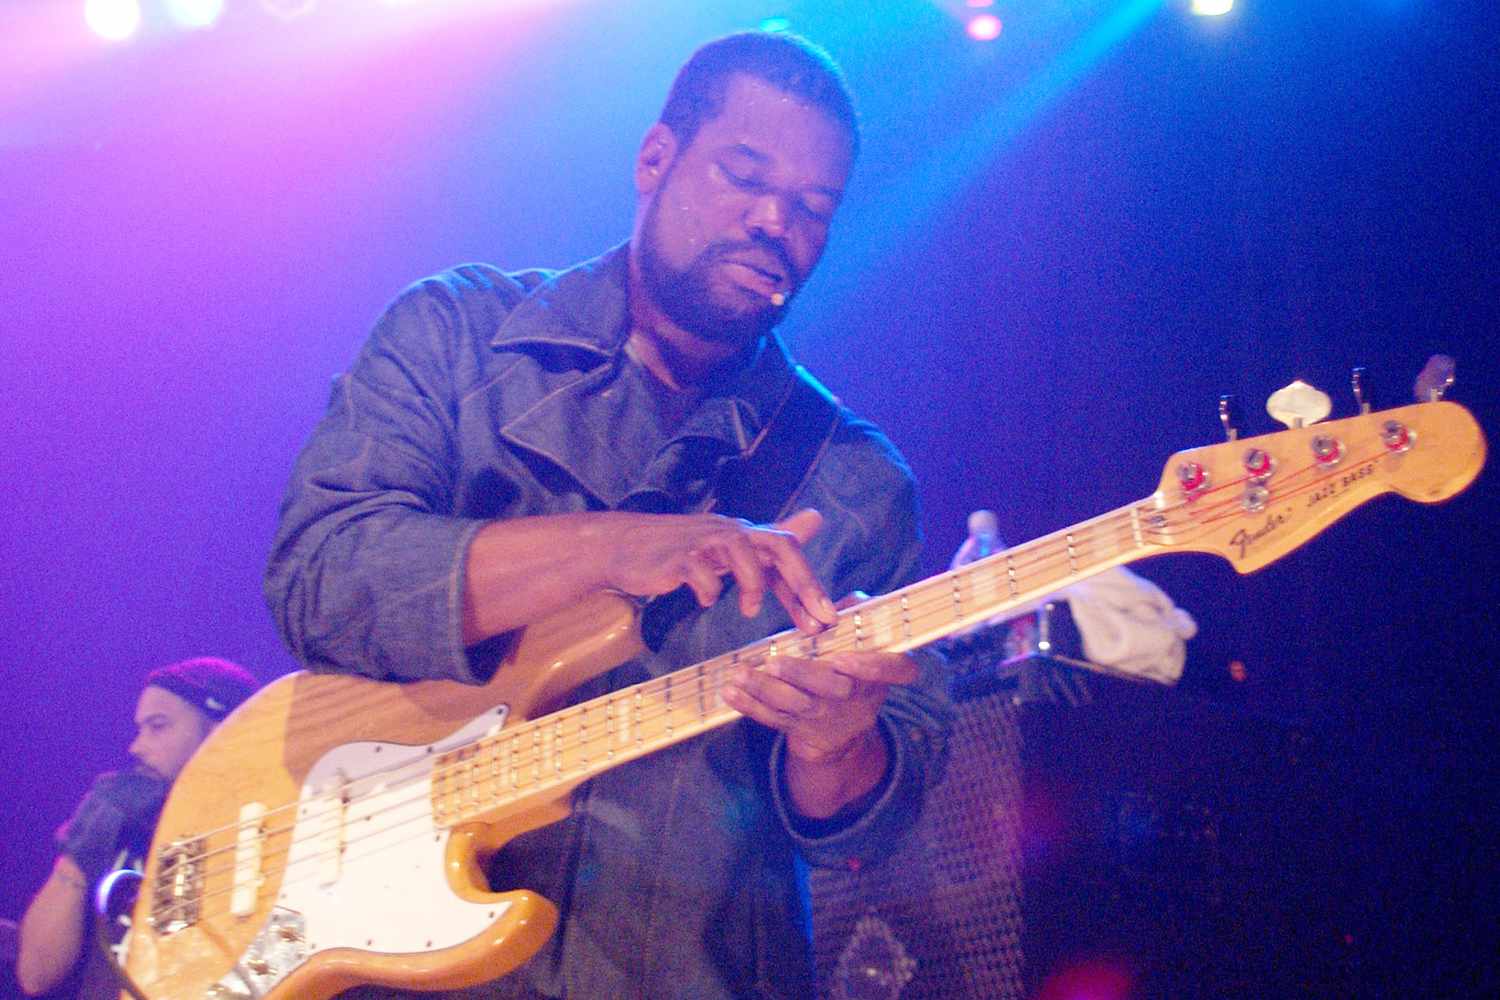 Hub (Leonard Nelson Hubbard) of The Roots performs in concert at the 9:30 Club in Washington DC during an MTV 2 $2Bill Tour.